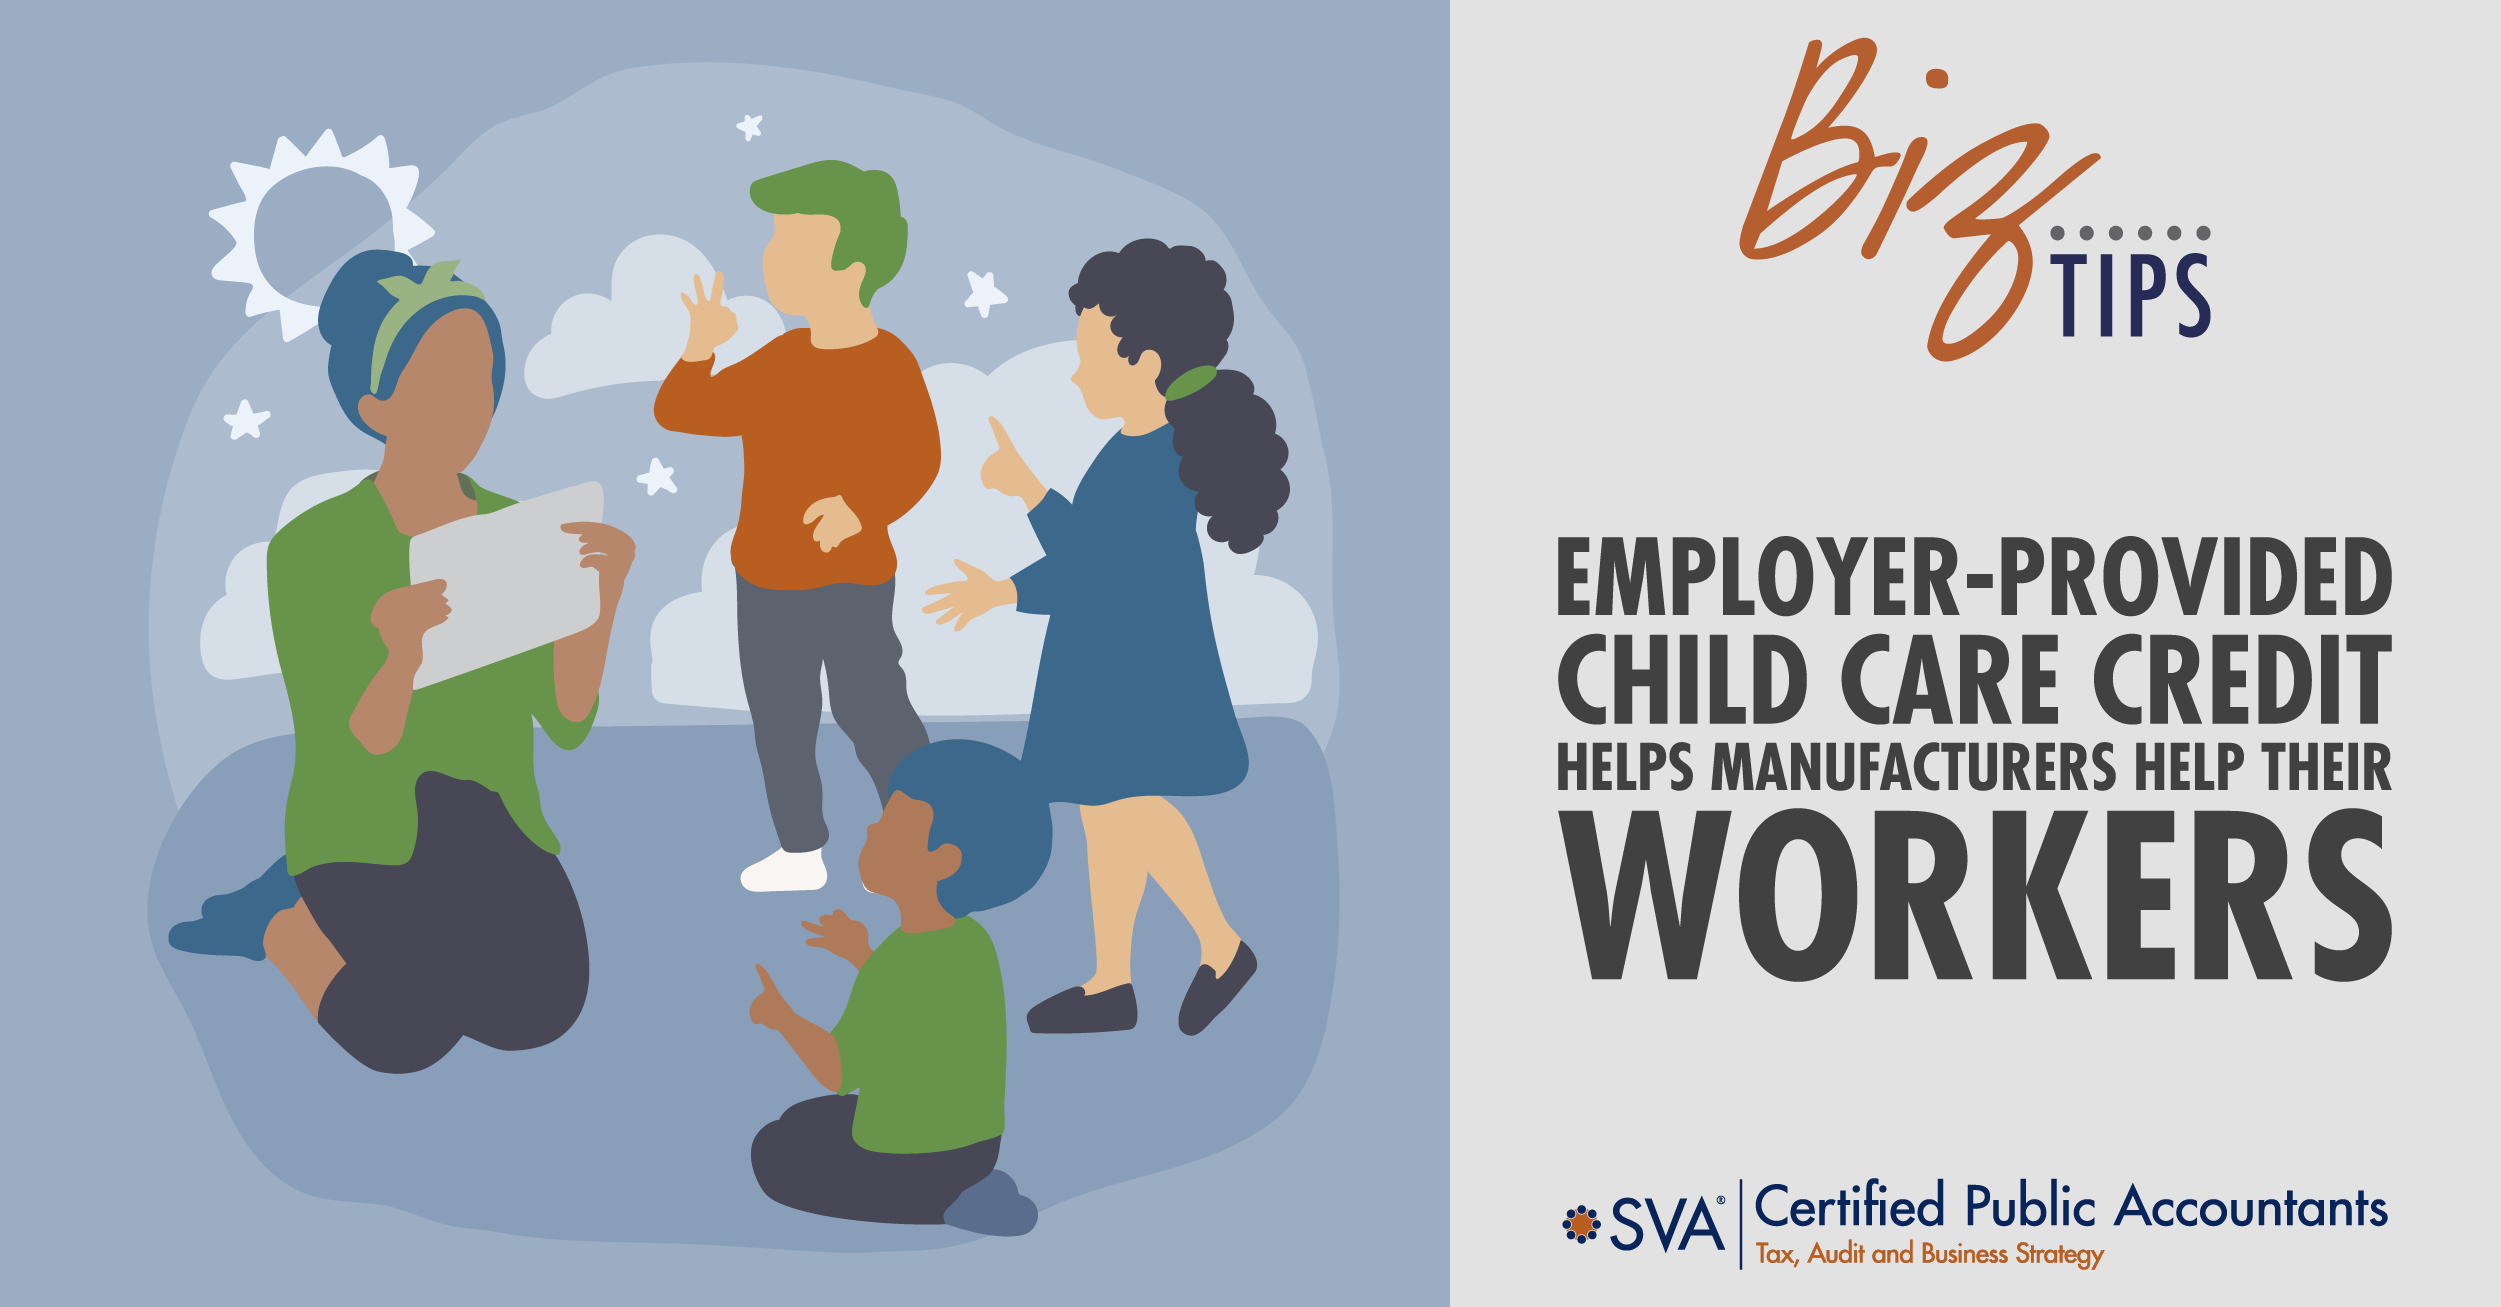 Employer-Provided Child Care Credit Helps Manufacturers Help Their Workers